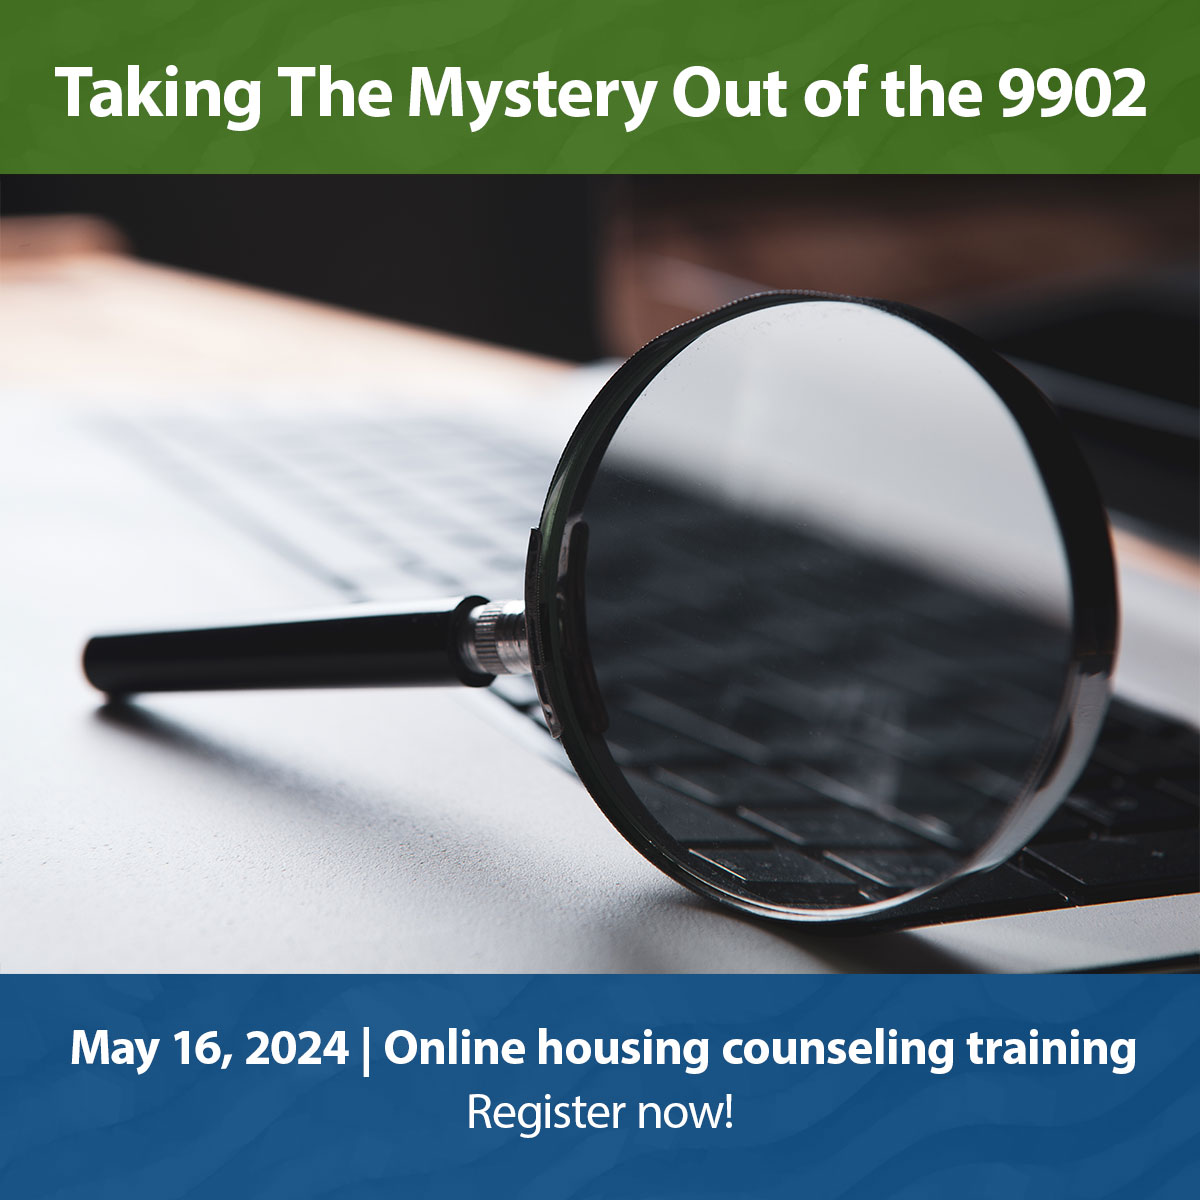 It’s #TrainingTuesday and there’s still time to register for this week’s housing counseling training! This course will go over the Housing Counseling Quarterly Report, the HUD-9902, common reporting errors and how to accurately report eligible activities and outcomes.